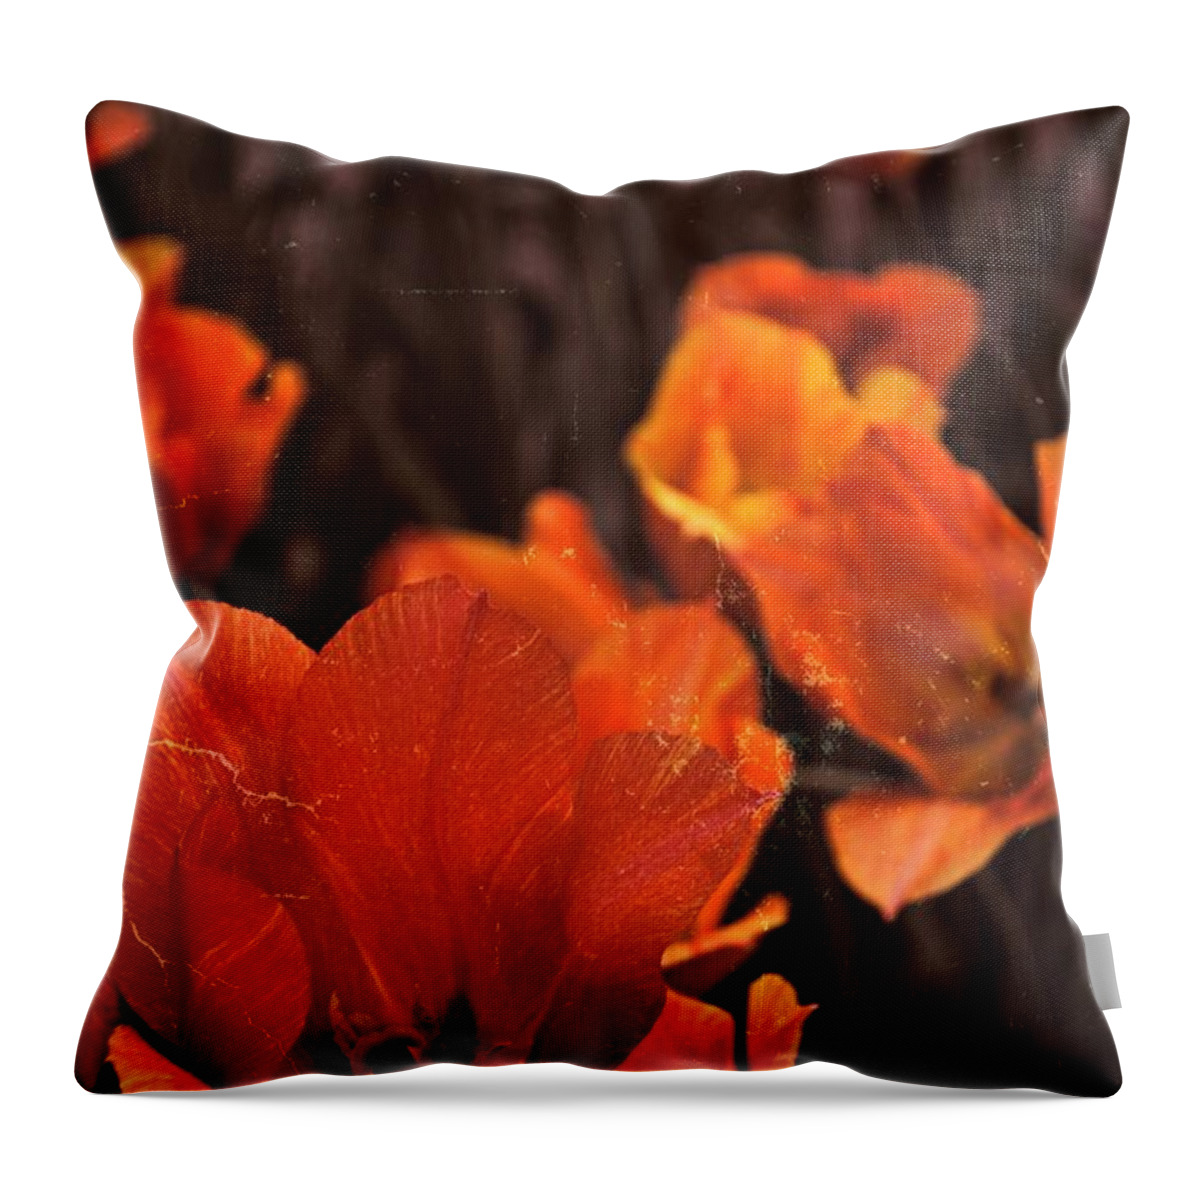 Tulip Throw Pillow featuring the photograph Antiqued Tulips by Michelle Calkins